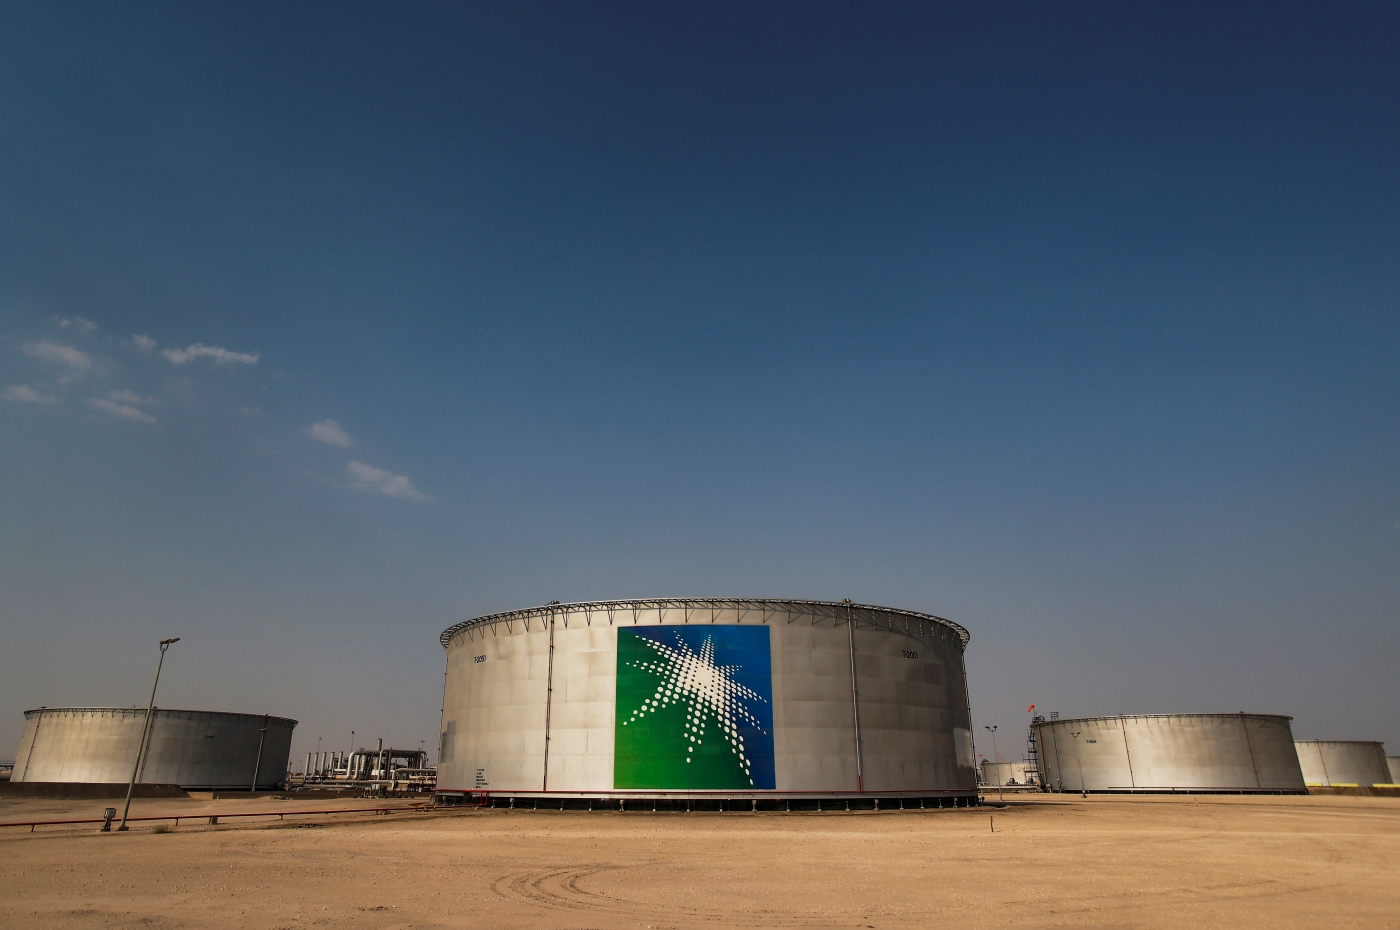 Saudi adopts 'shock and awe' tactics against rivals in the oil market